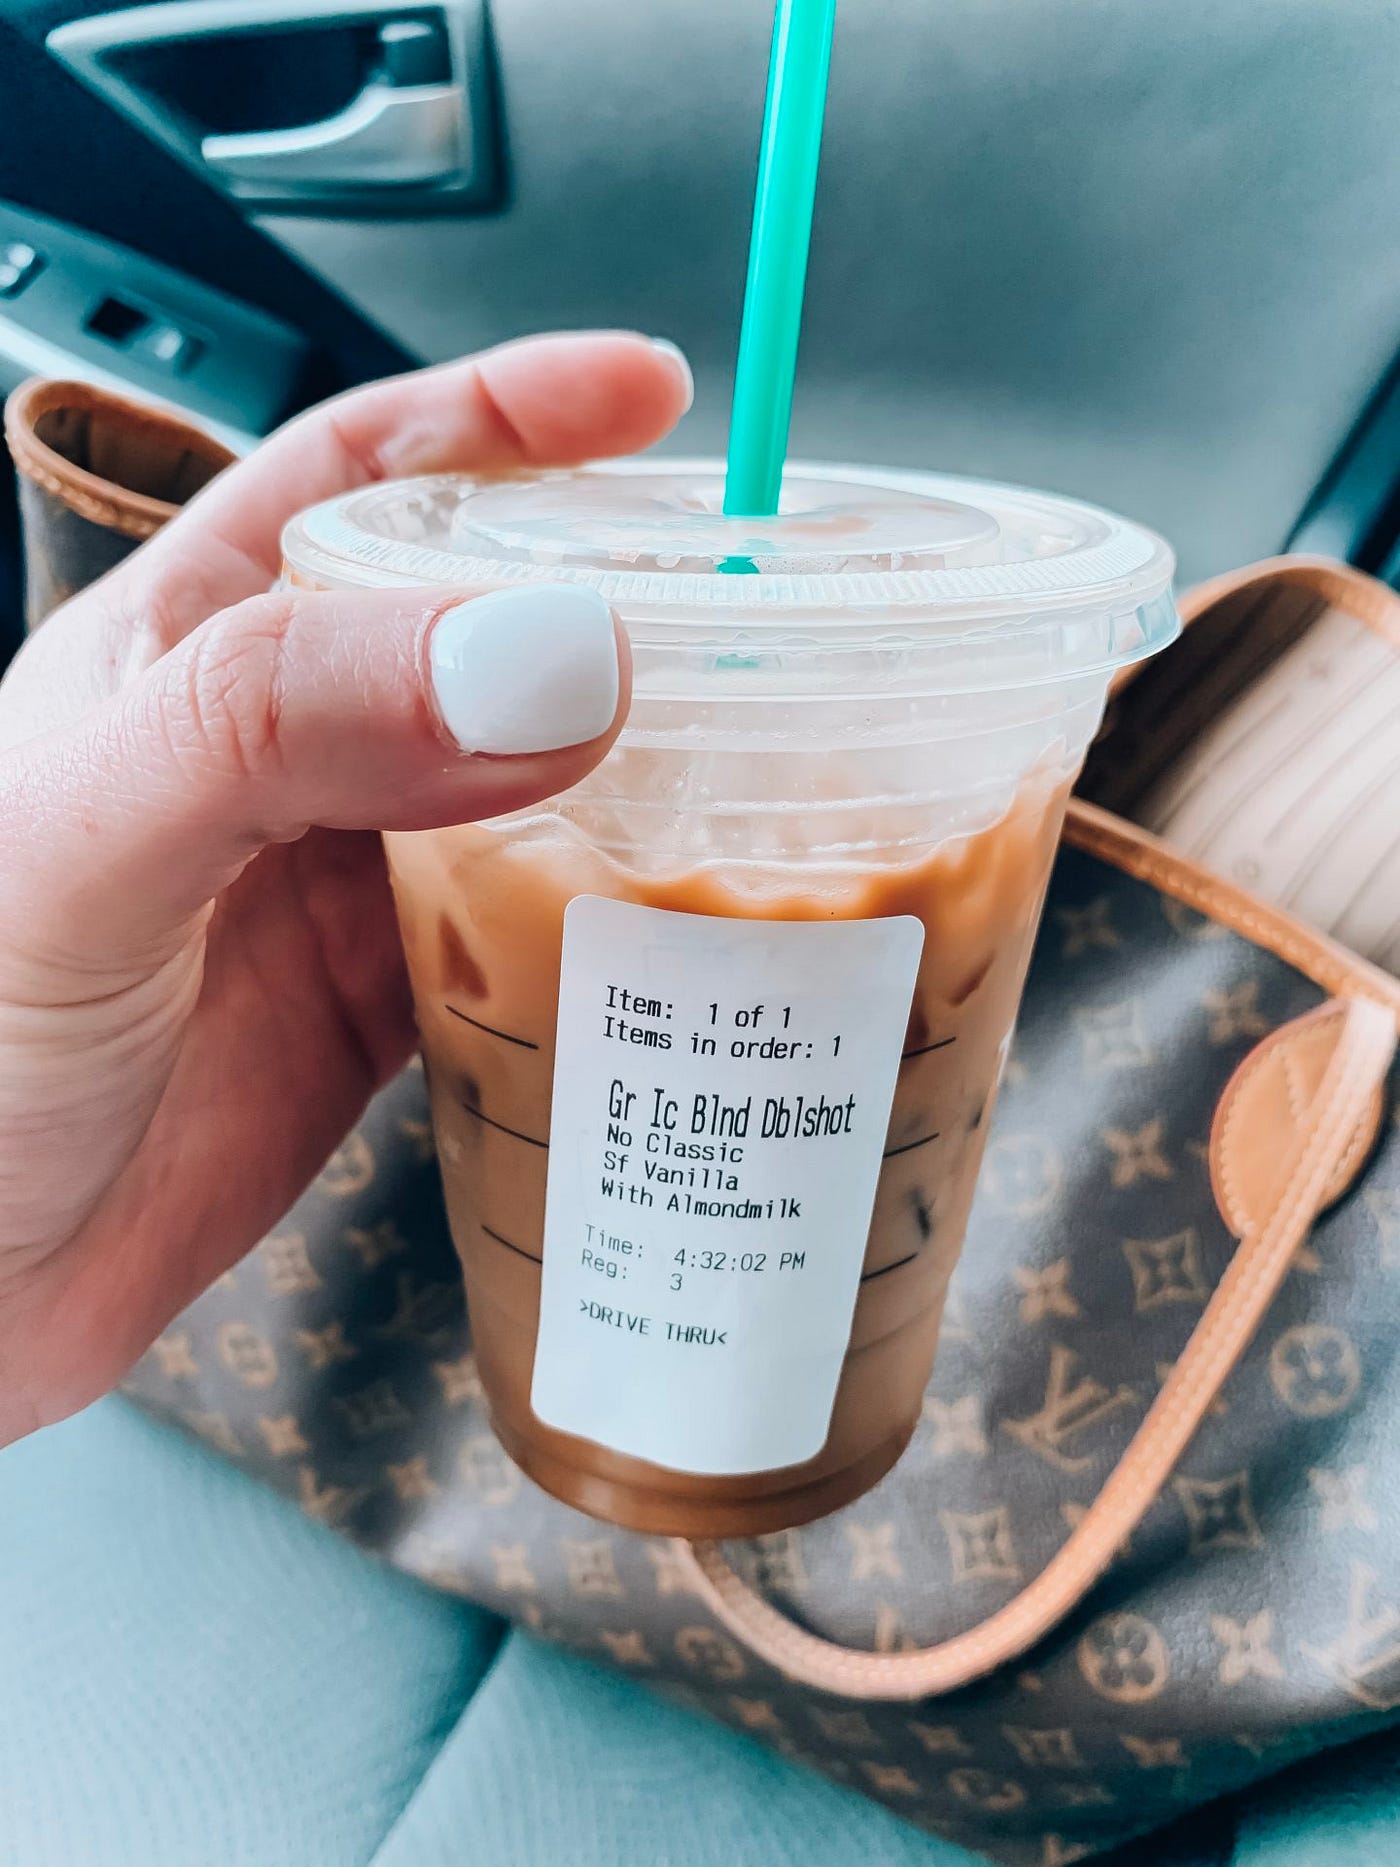 Start Your Day with Starbucks Iced Coffee